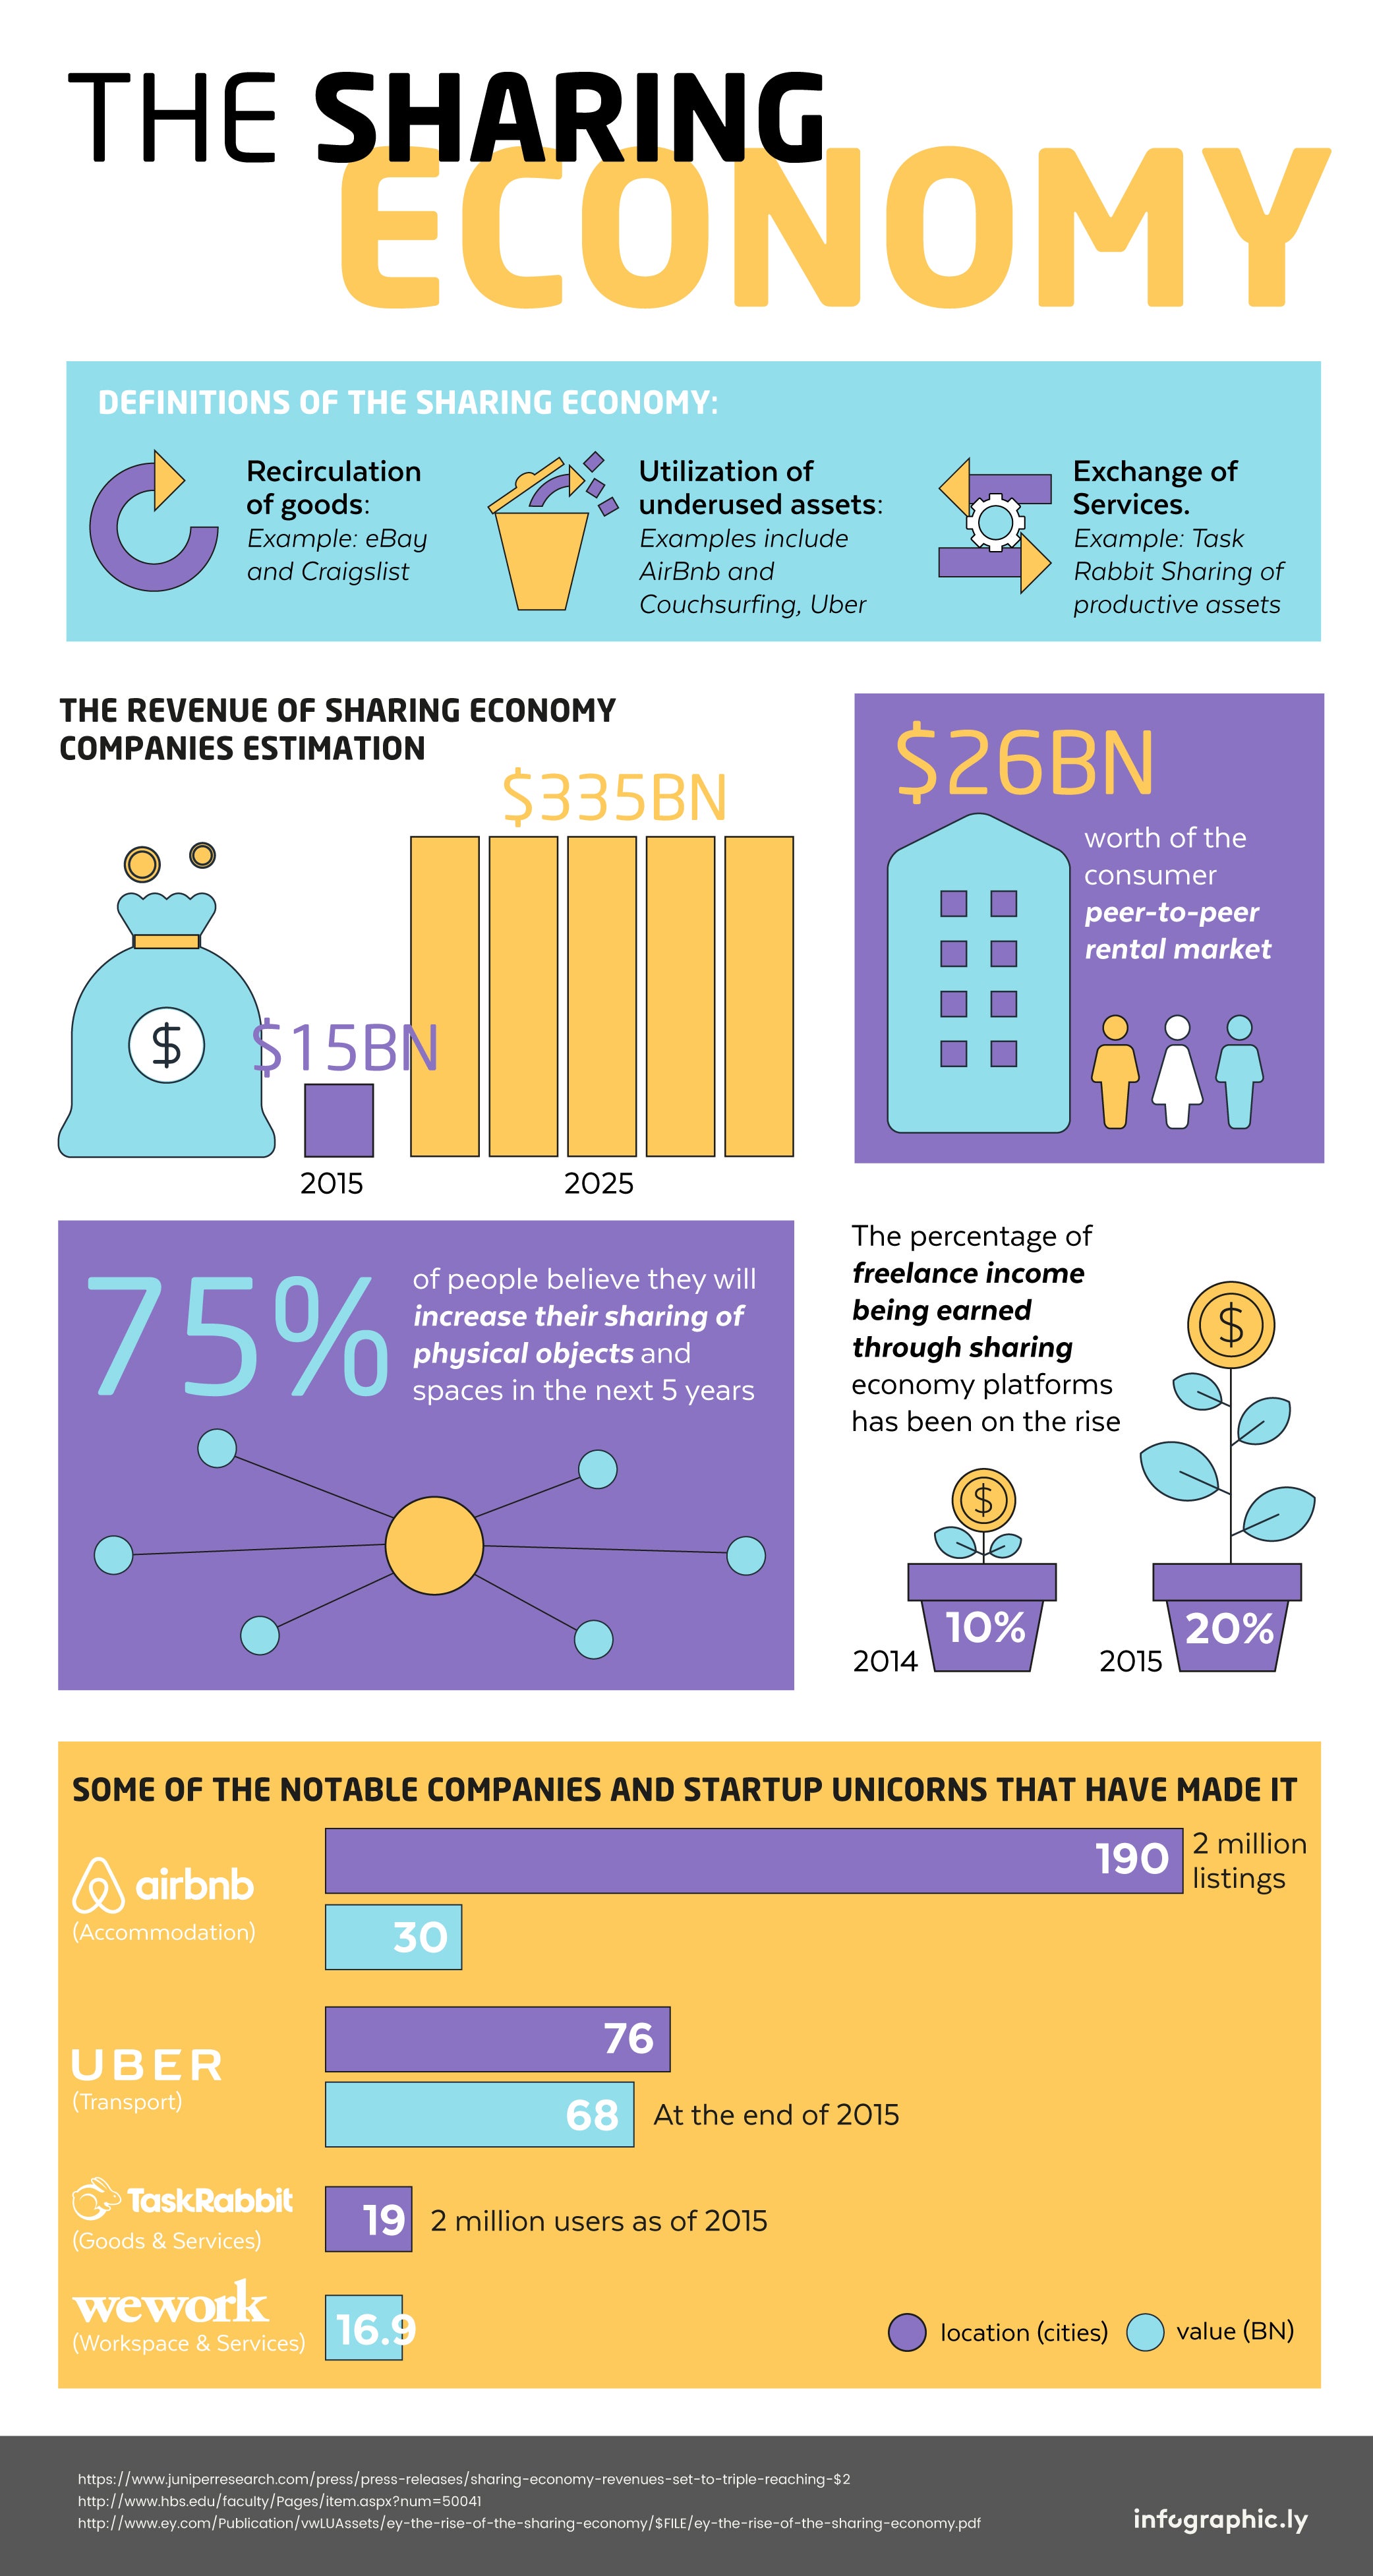 Sharing Economy - What is it and how does it work?